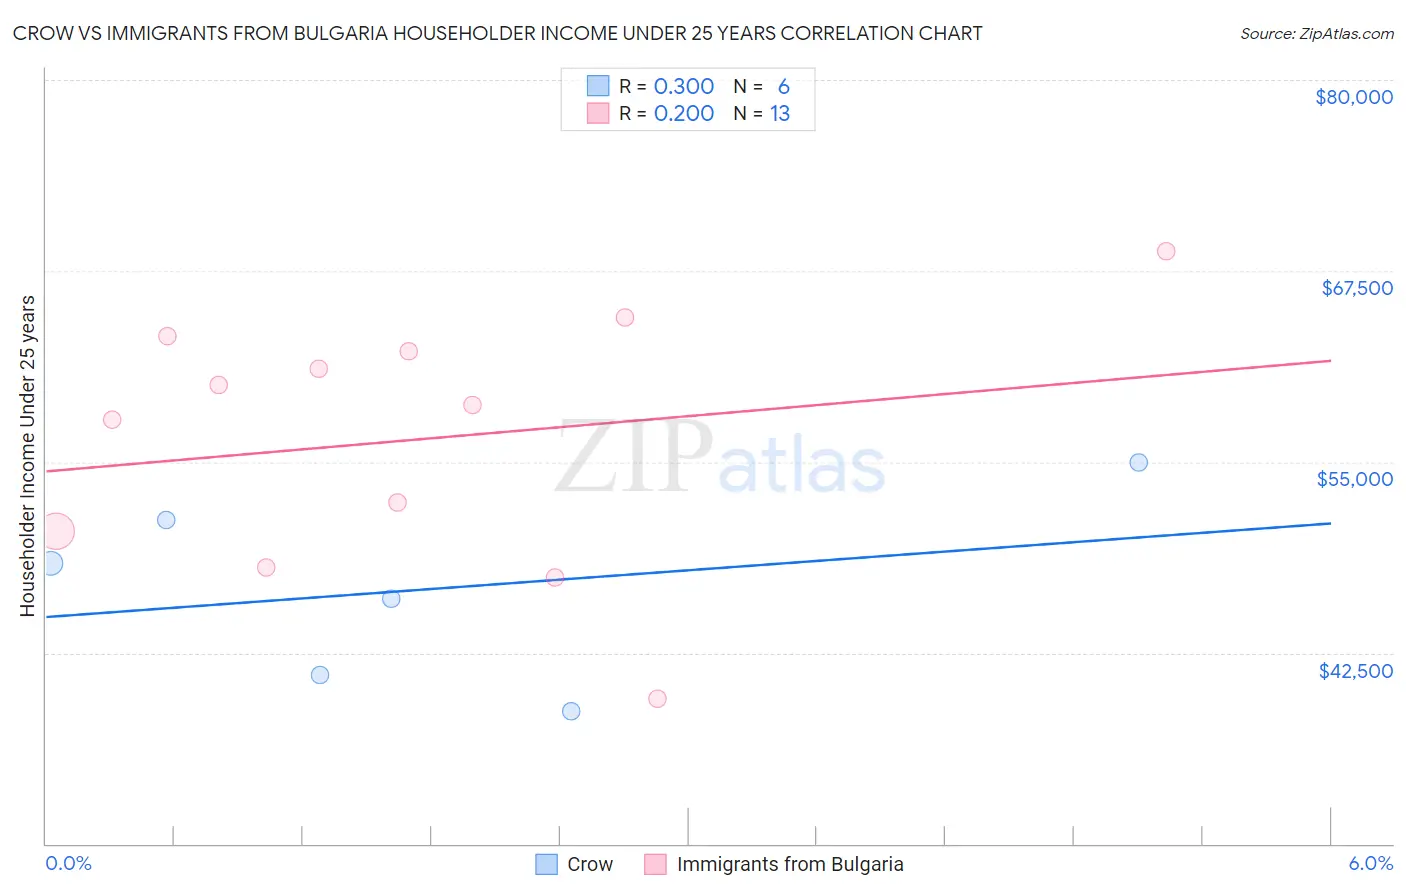 Crow vs Immigrants from Bulgaria Householder Income Under 25 years